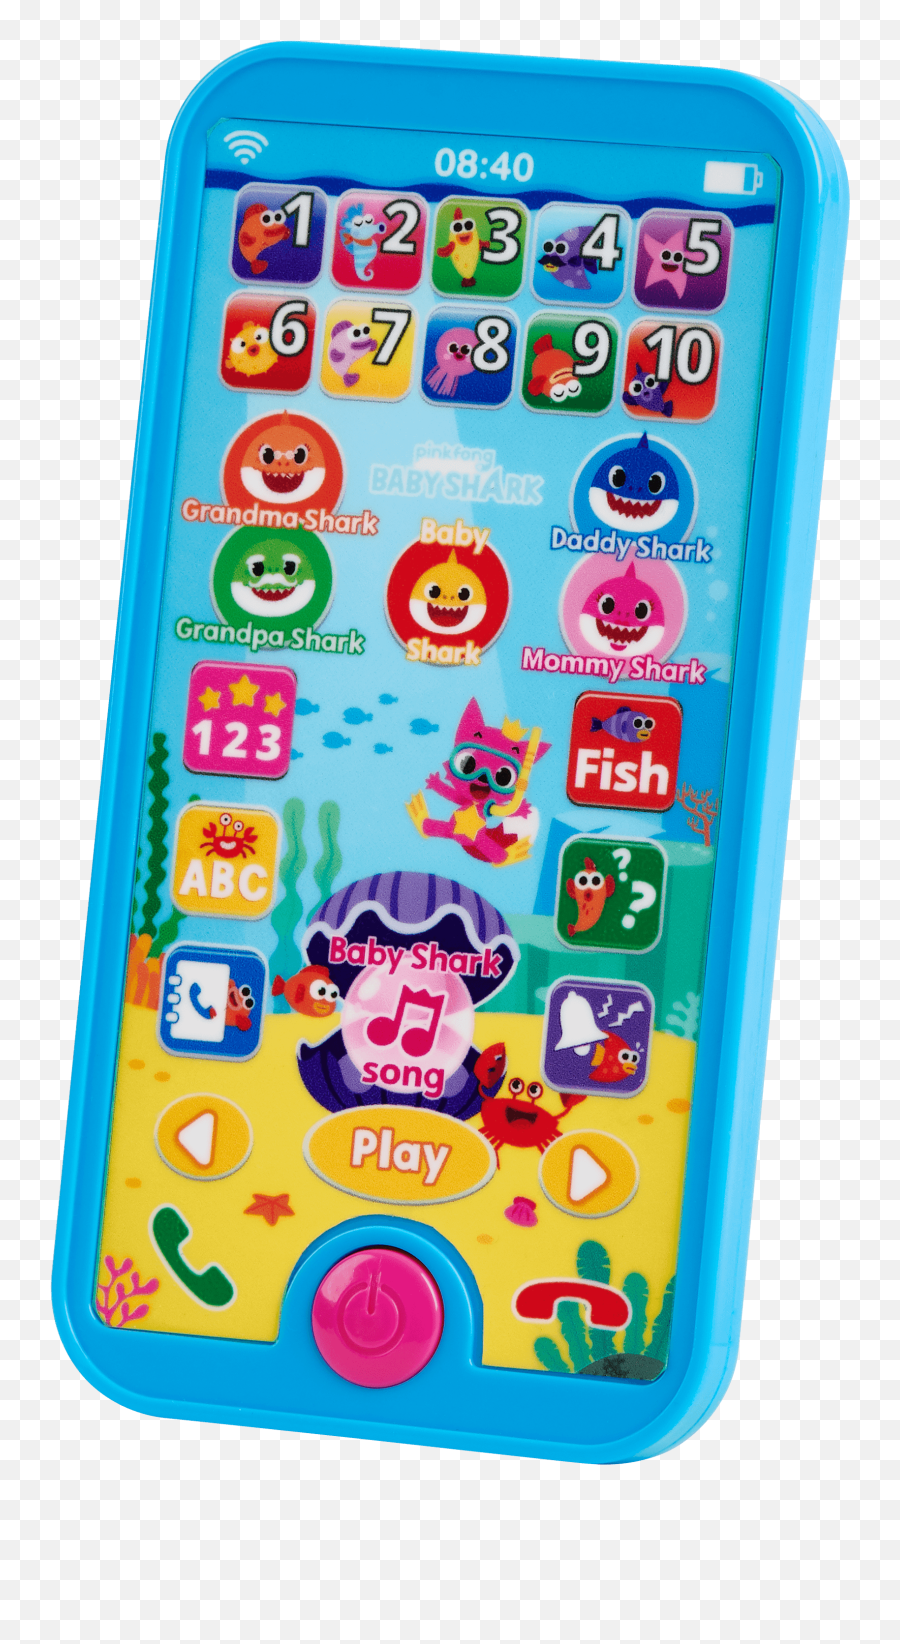 Pinkfong Baby Shark Smartphone - Baby Shark Tablet Emoji,Free Easter Emoticons For Cell Phone